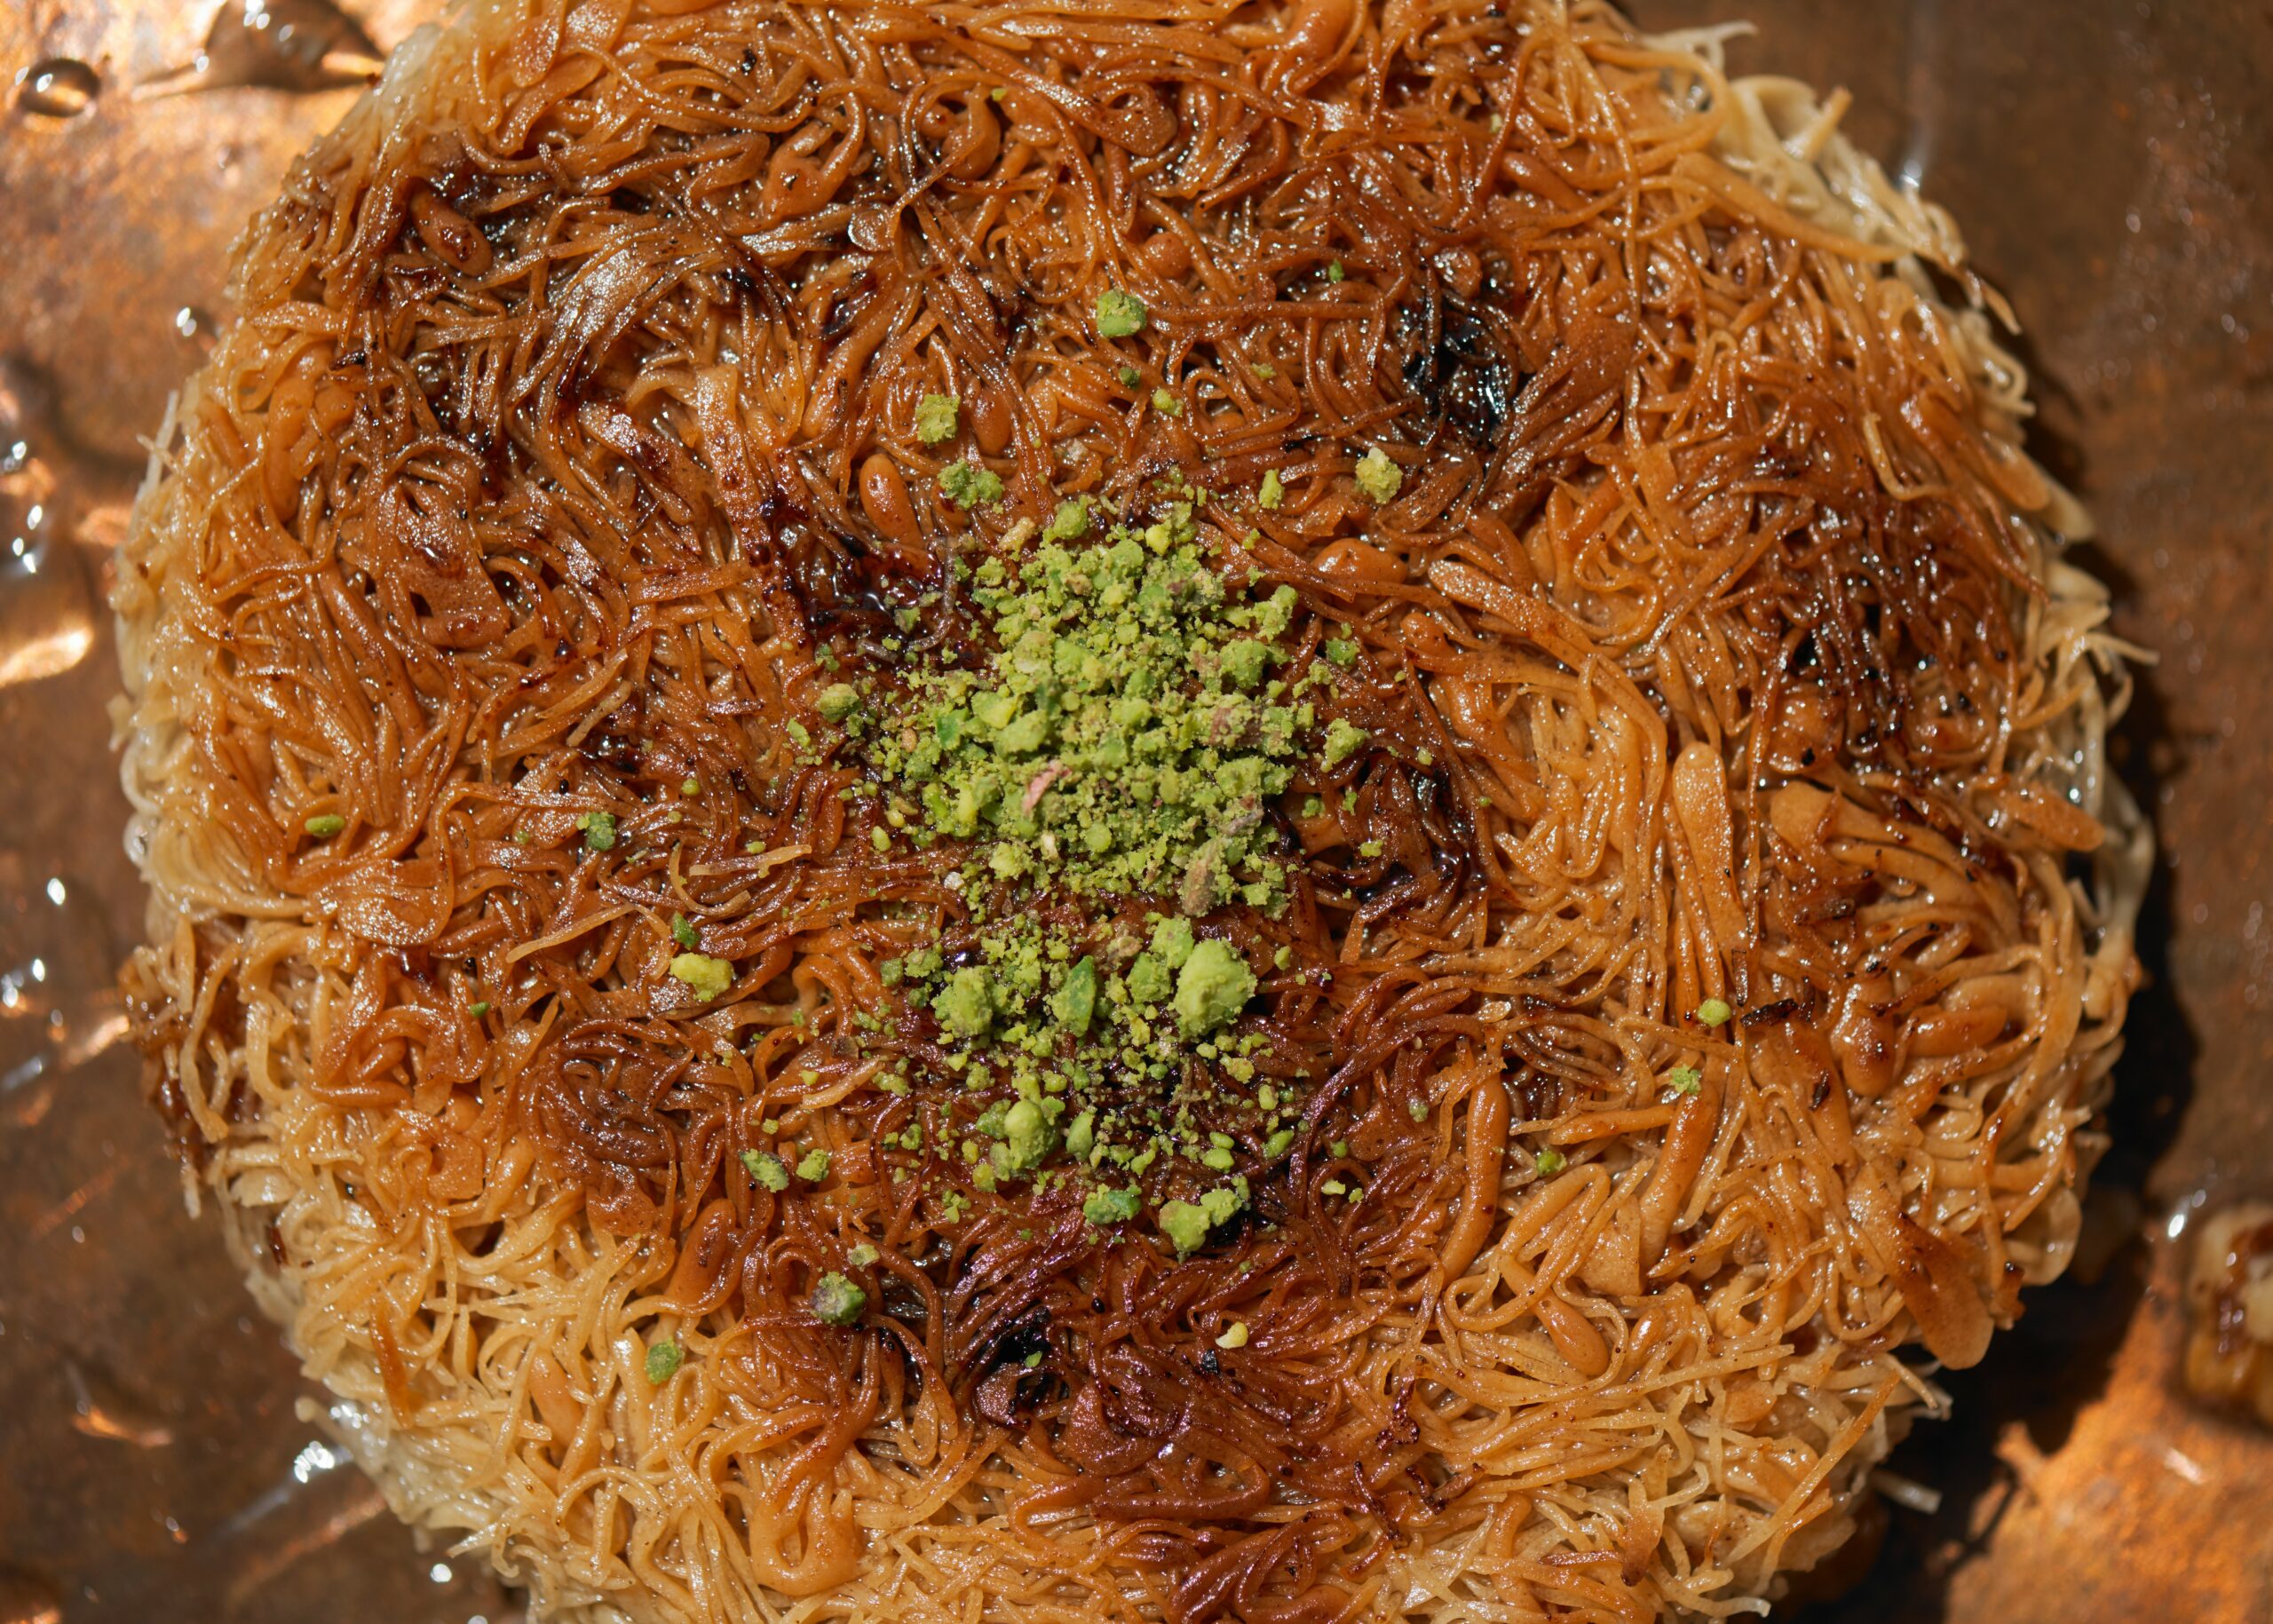 Traditional knafeh made with noodles of dough and topped with crushed pistachios